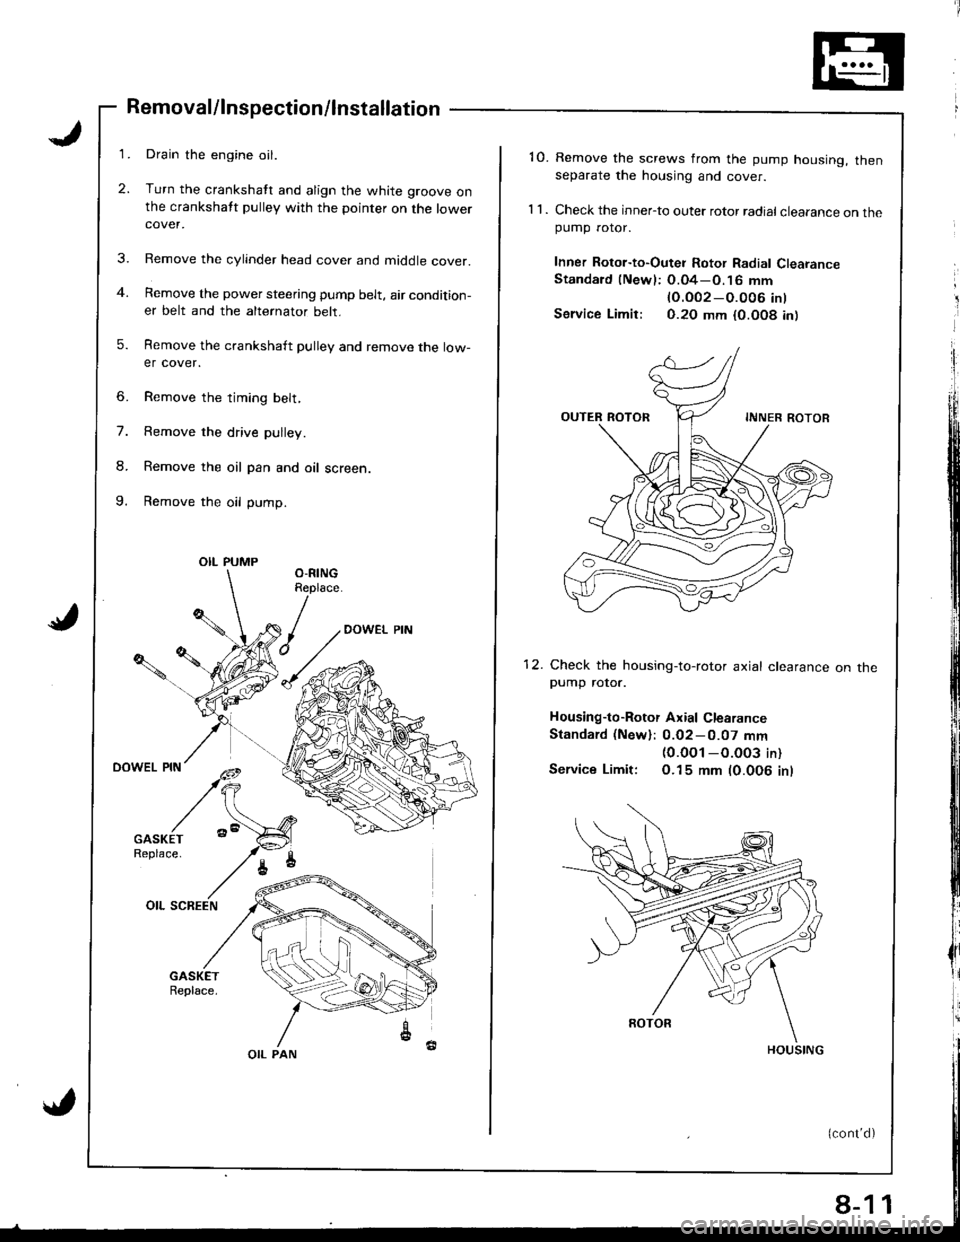 HONDA INTEGRA 1998 4.G Workshop Manual 3.
Removal/lnspection/lnstallation
Drain the engine oil.
Turn the crankshatt and align the white groove onthe crankshatt pulley with the pointer on the lowercover.
Remove the cylinder head cover and m